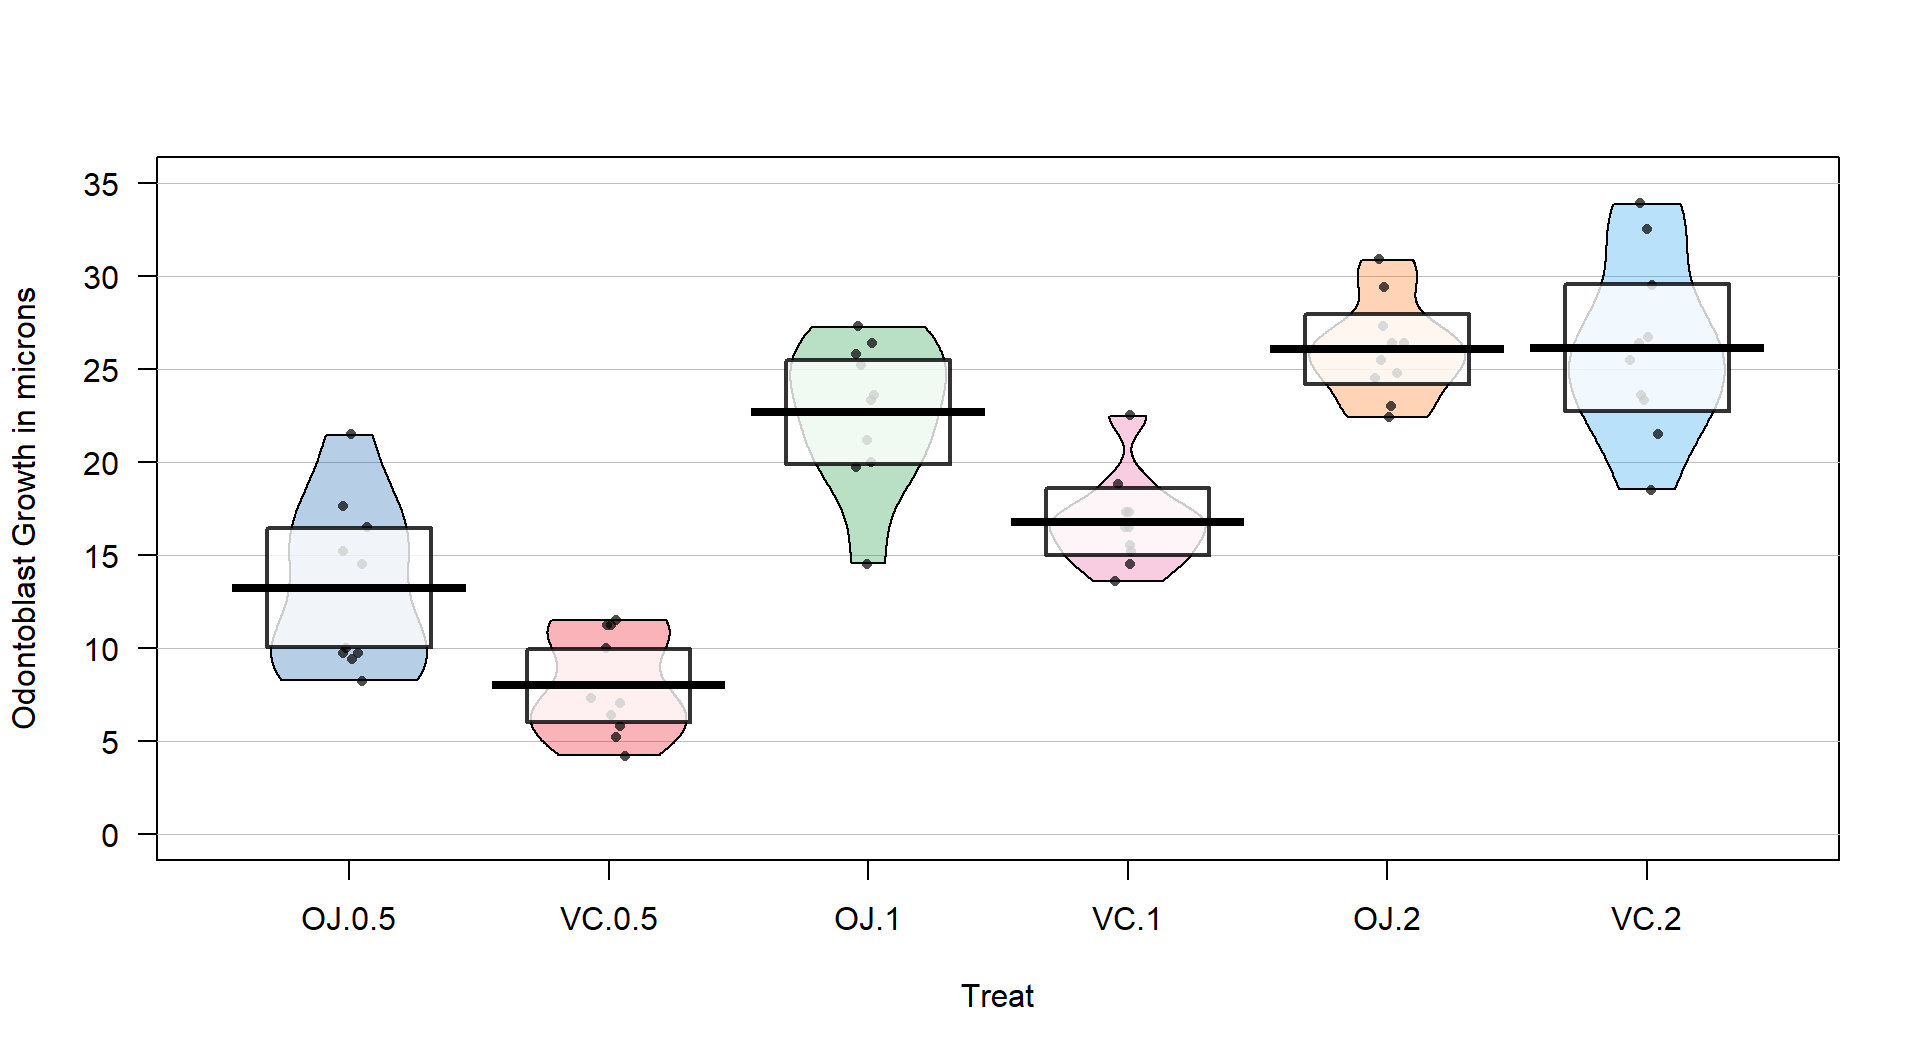 Pirate-plot of odontoblast growth responses for the six treatment level combinations.